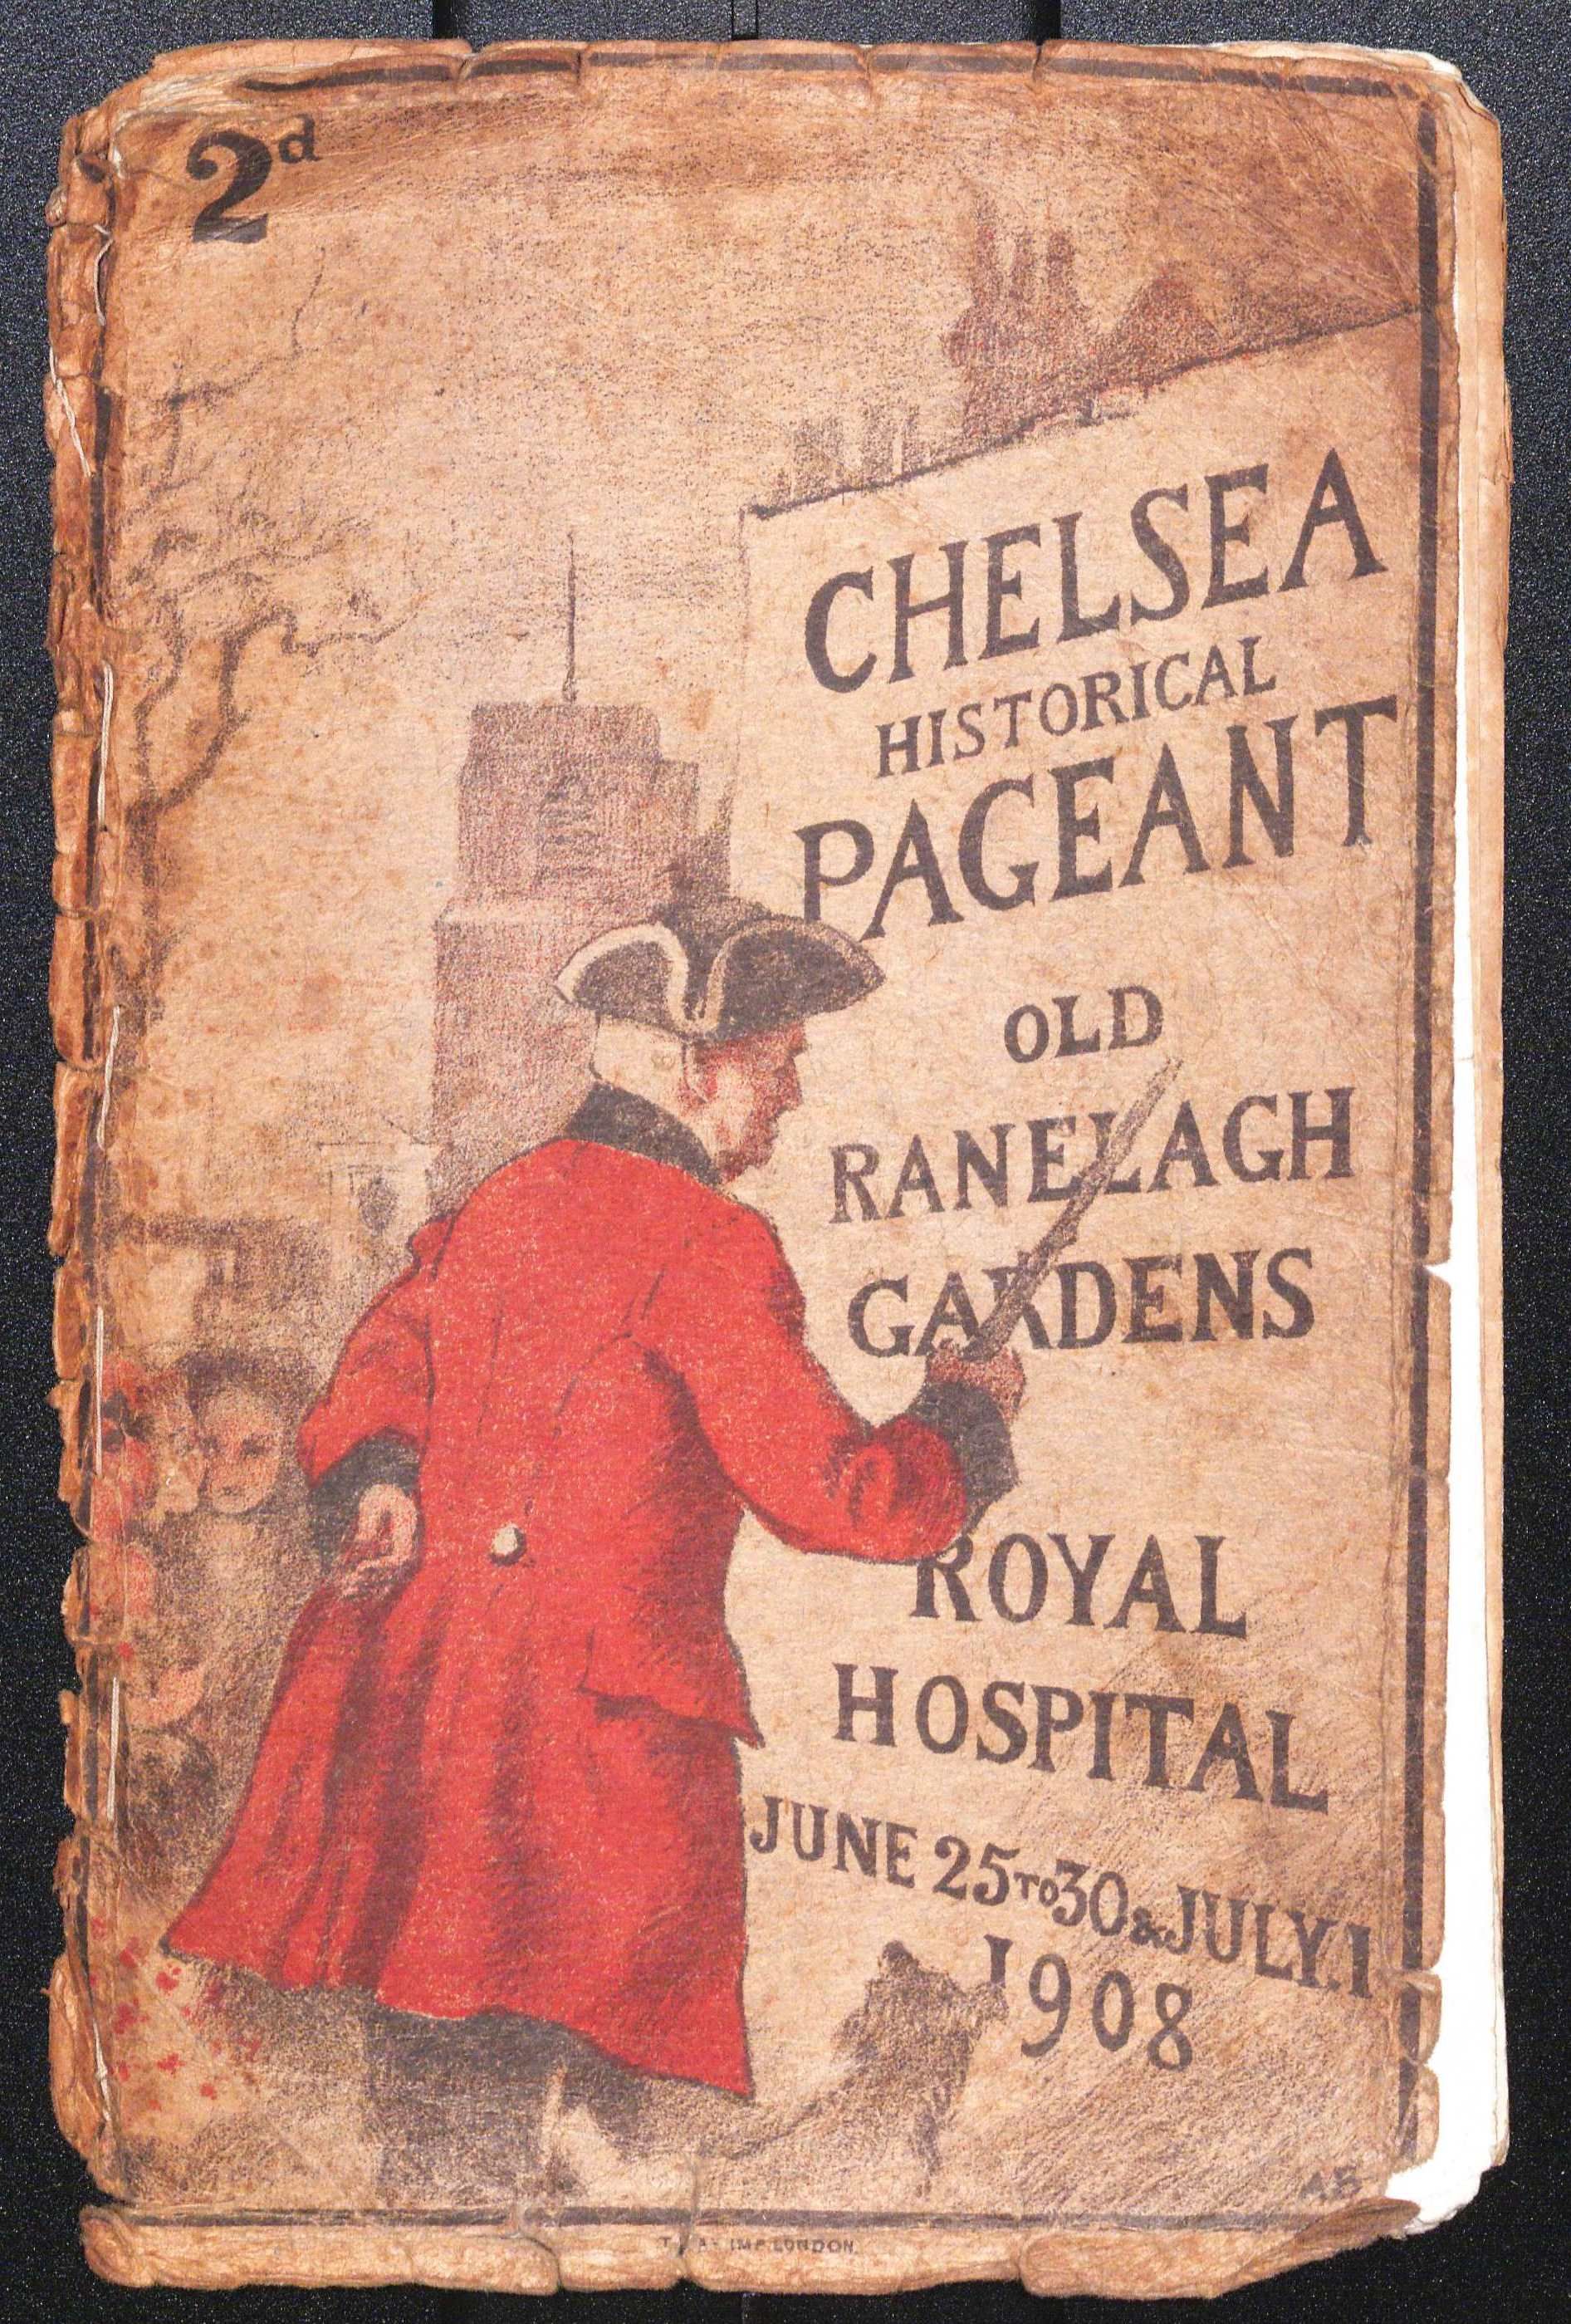 Pageant Programme, Royal Hospital Chelsea collections